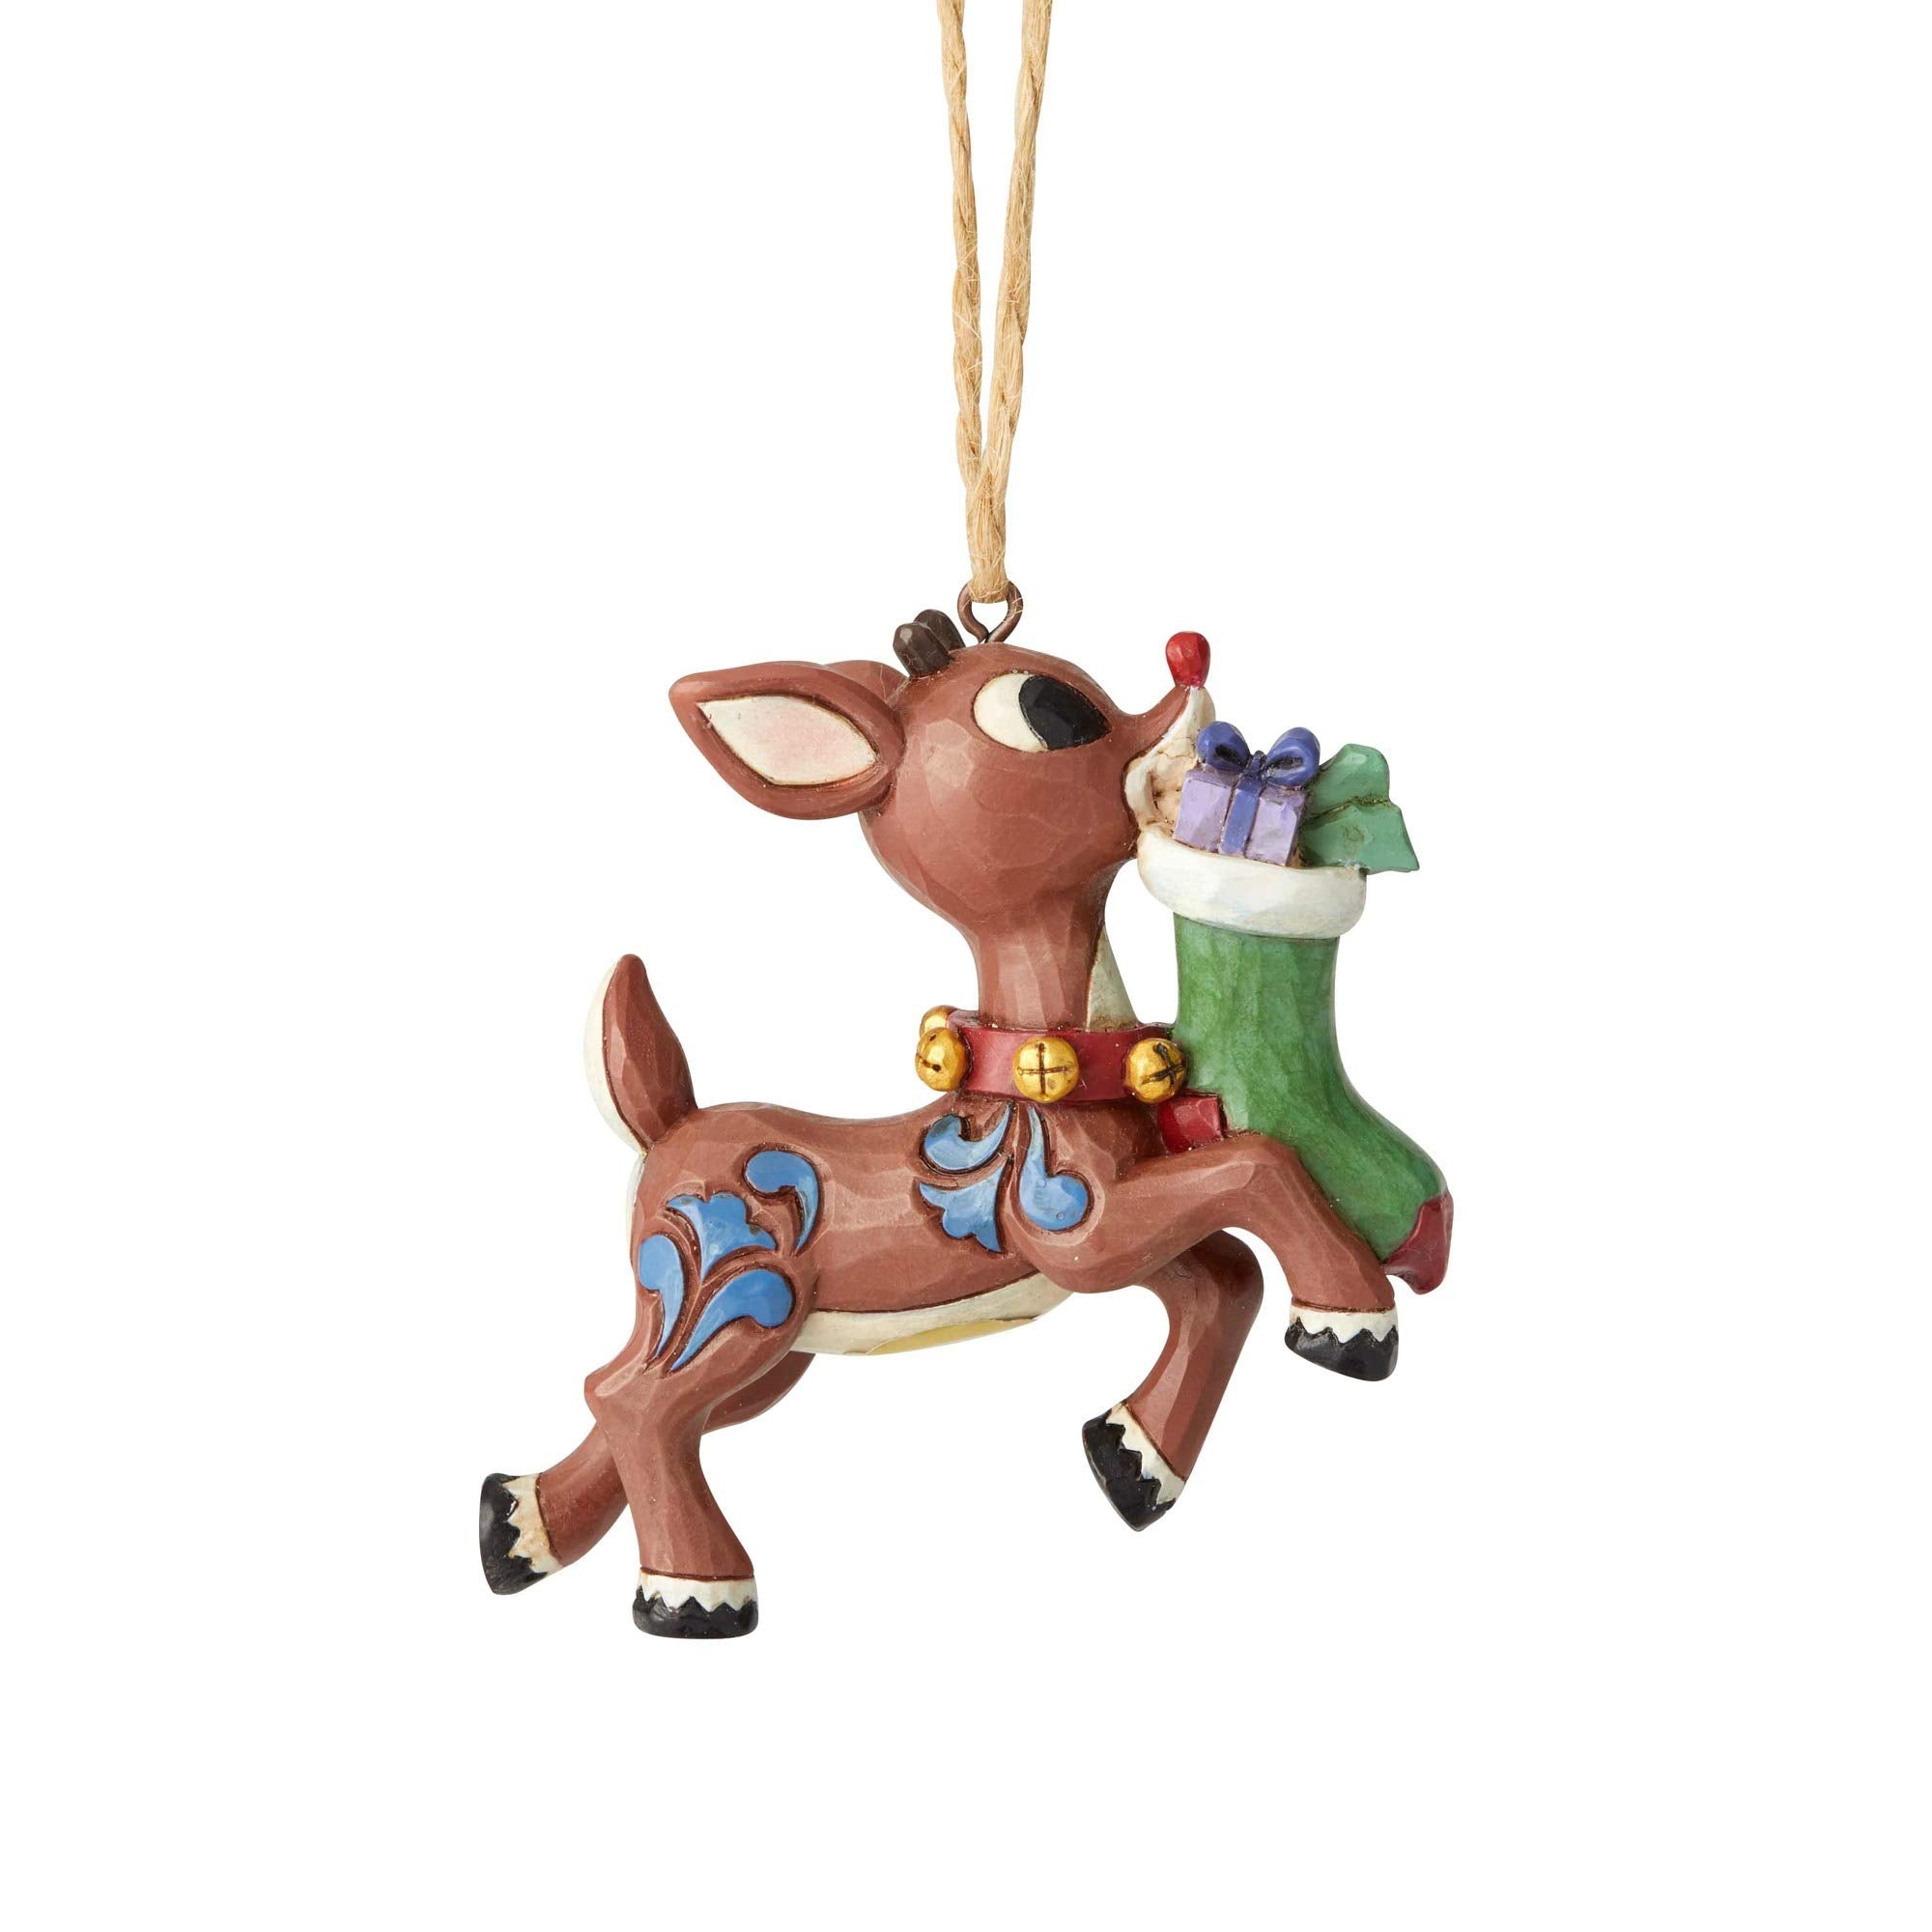 Enesco Rudolph Traditions by Jim Shore 2019 Stocking Hanging Ornament, 3.3 Inch, Multicolor